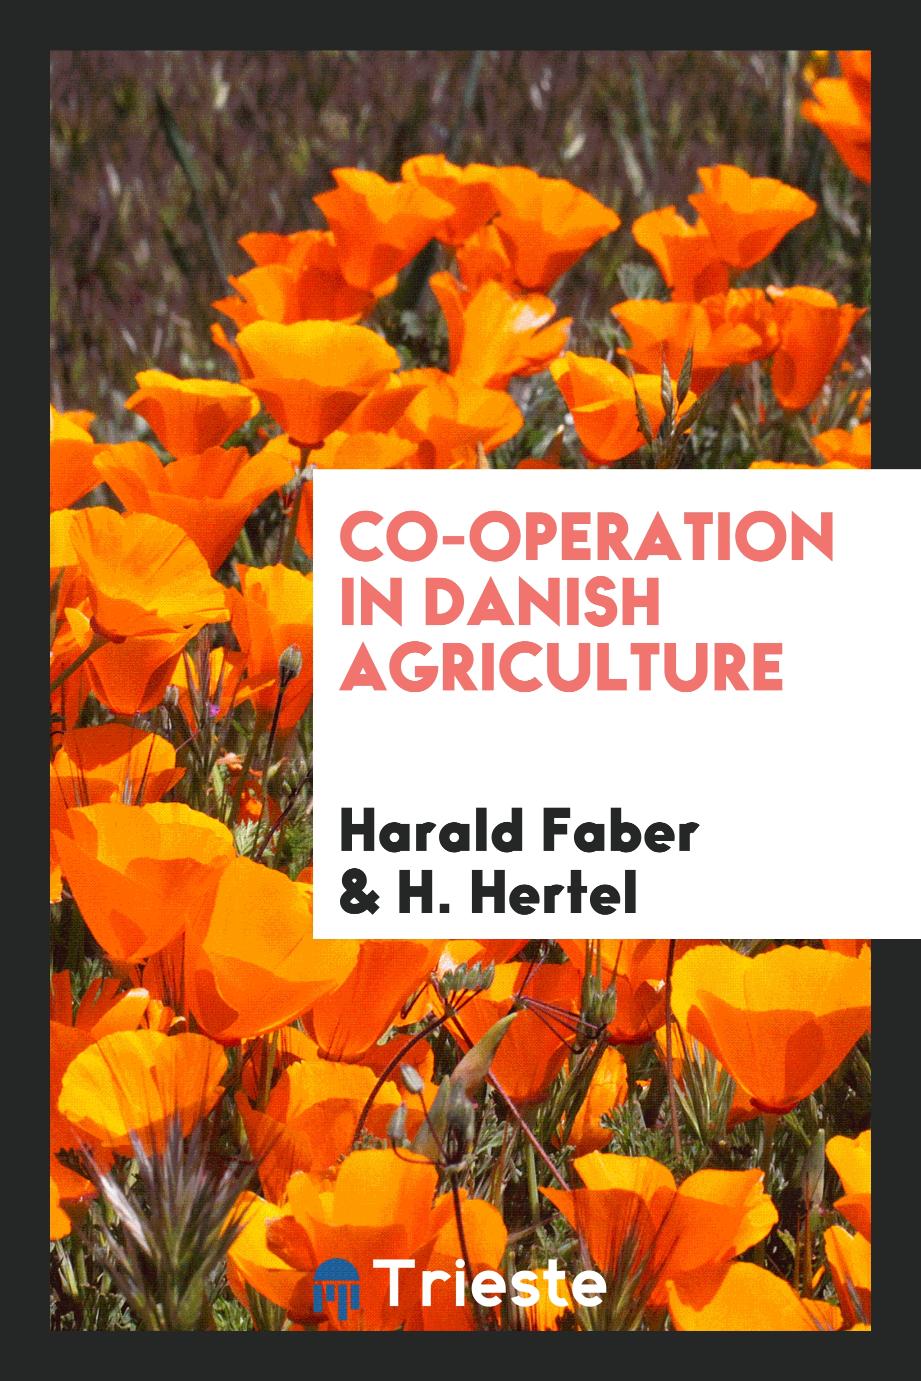 Co-operation in Danish agriculture